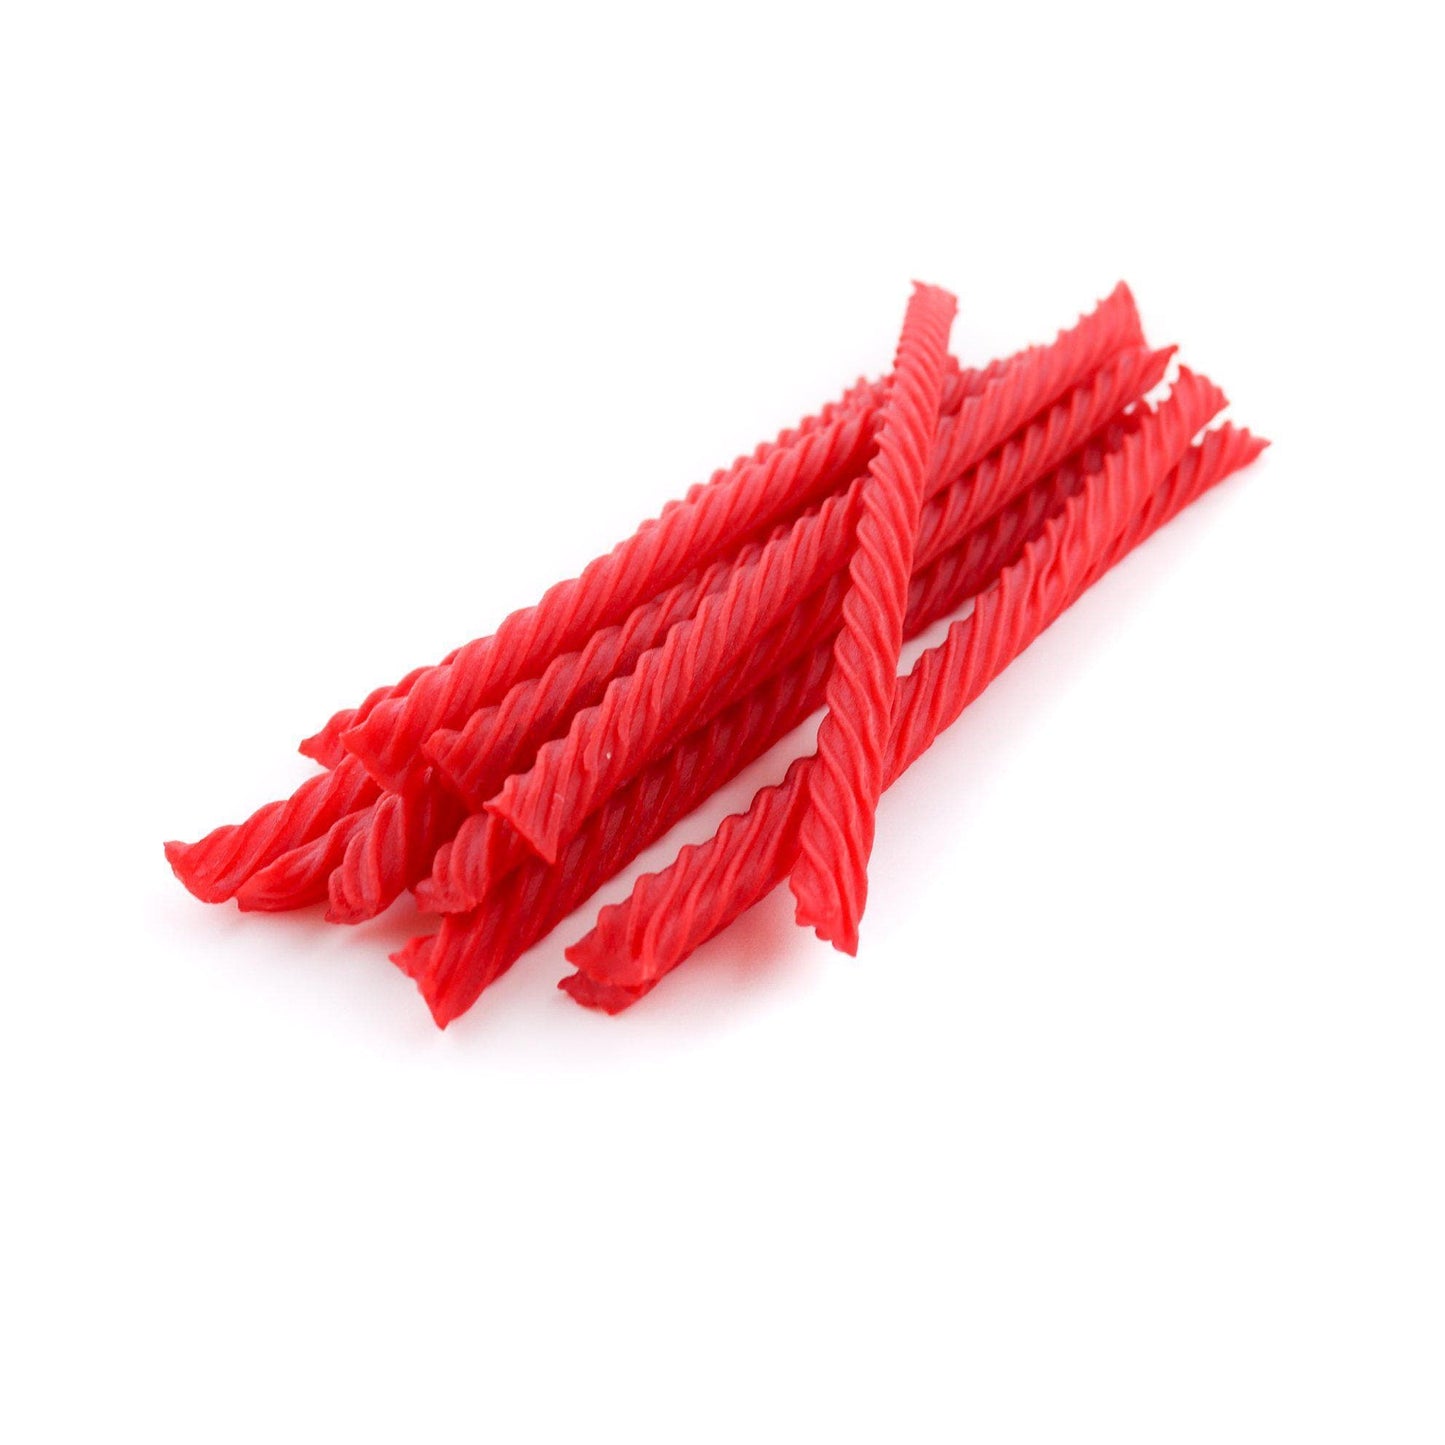 RED VINES red licorice candy Twists